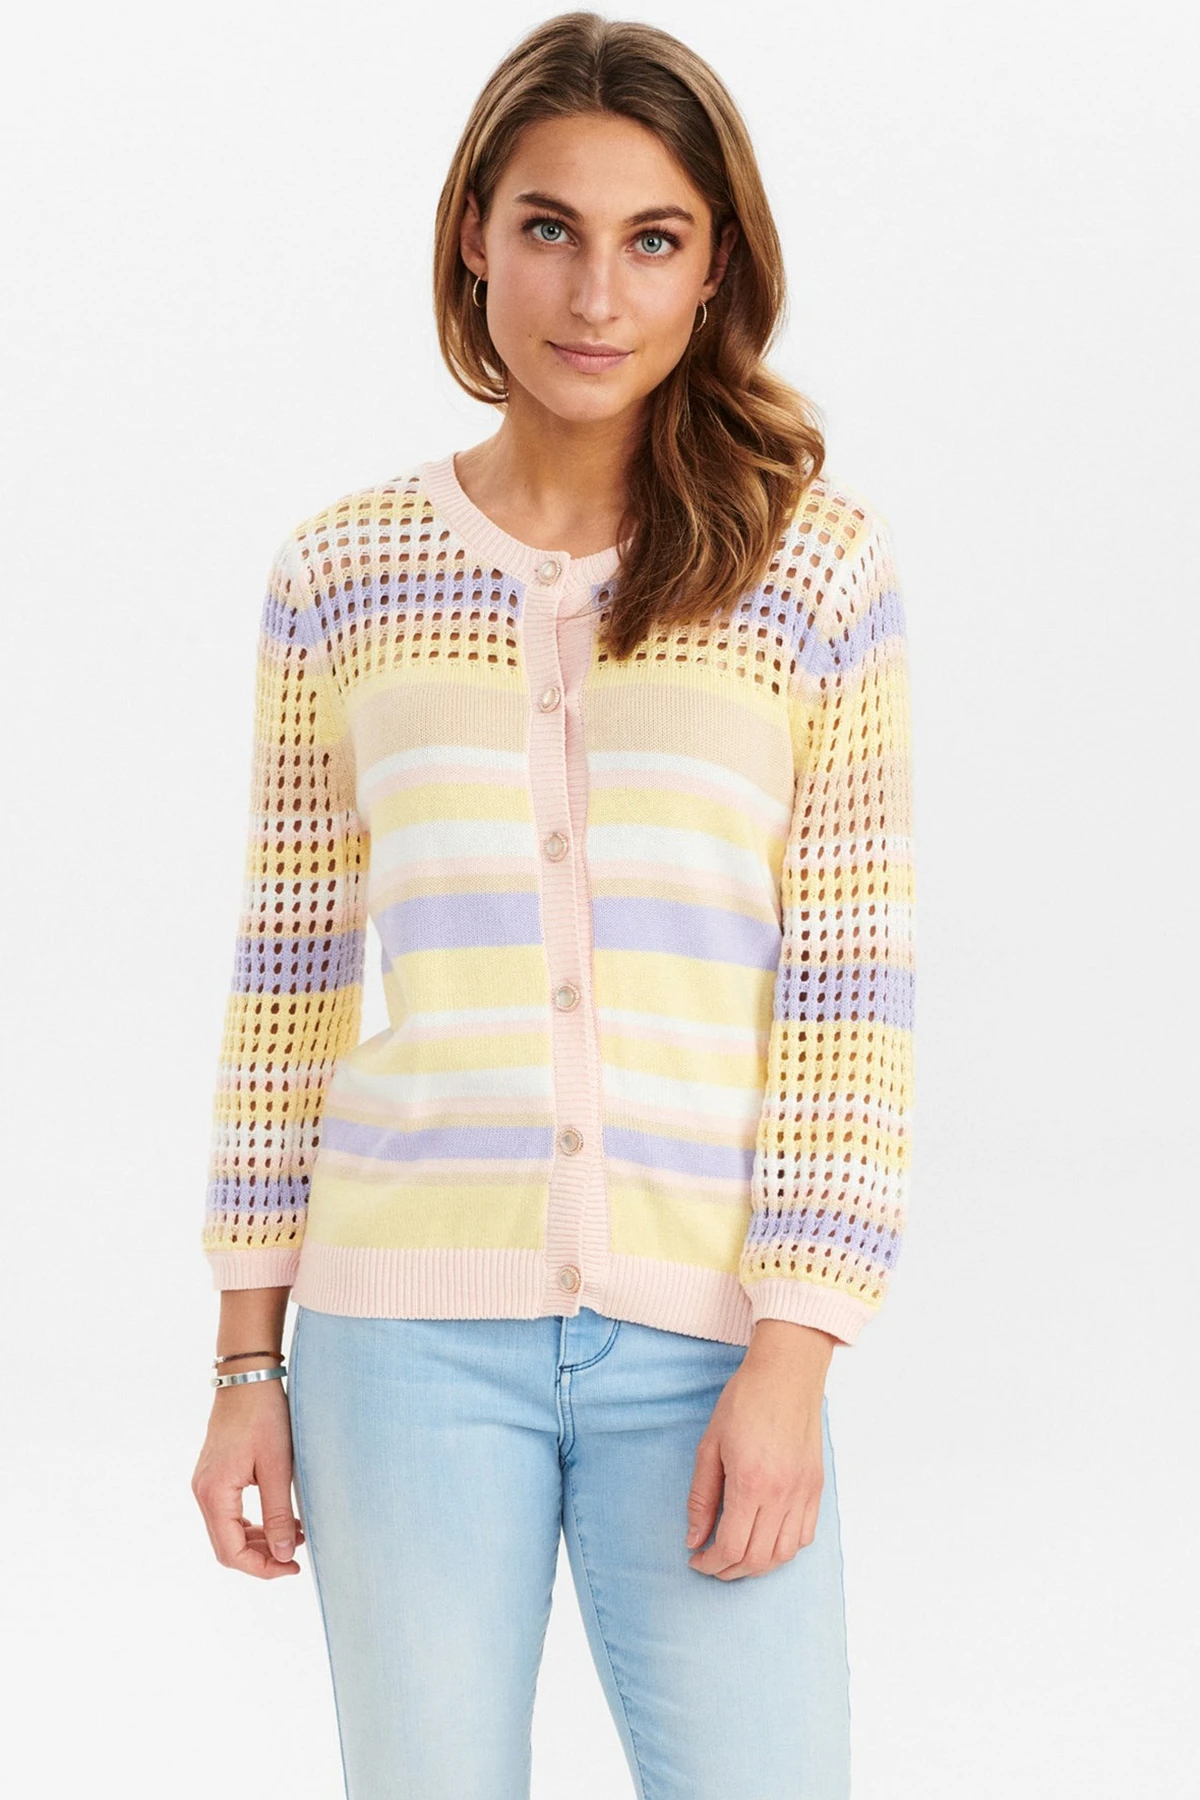 Cheap cardigans and knit wear - buy designer clothes online here